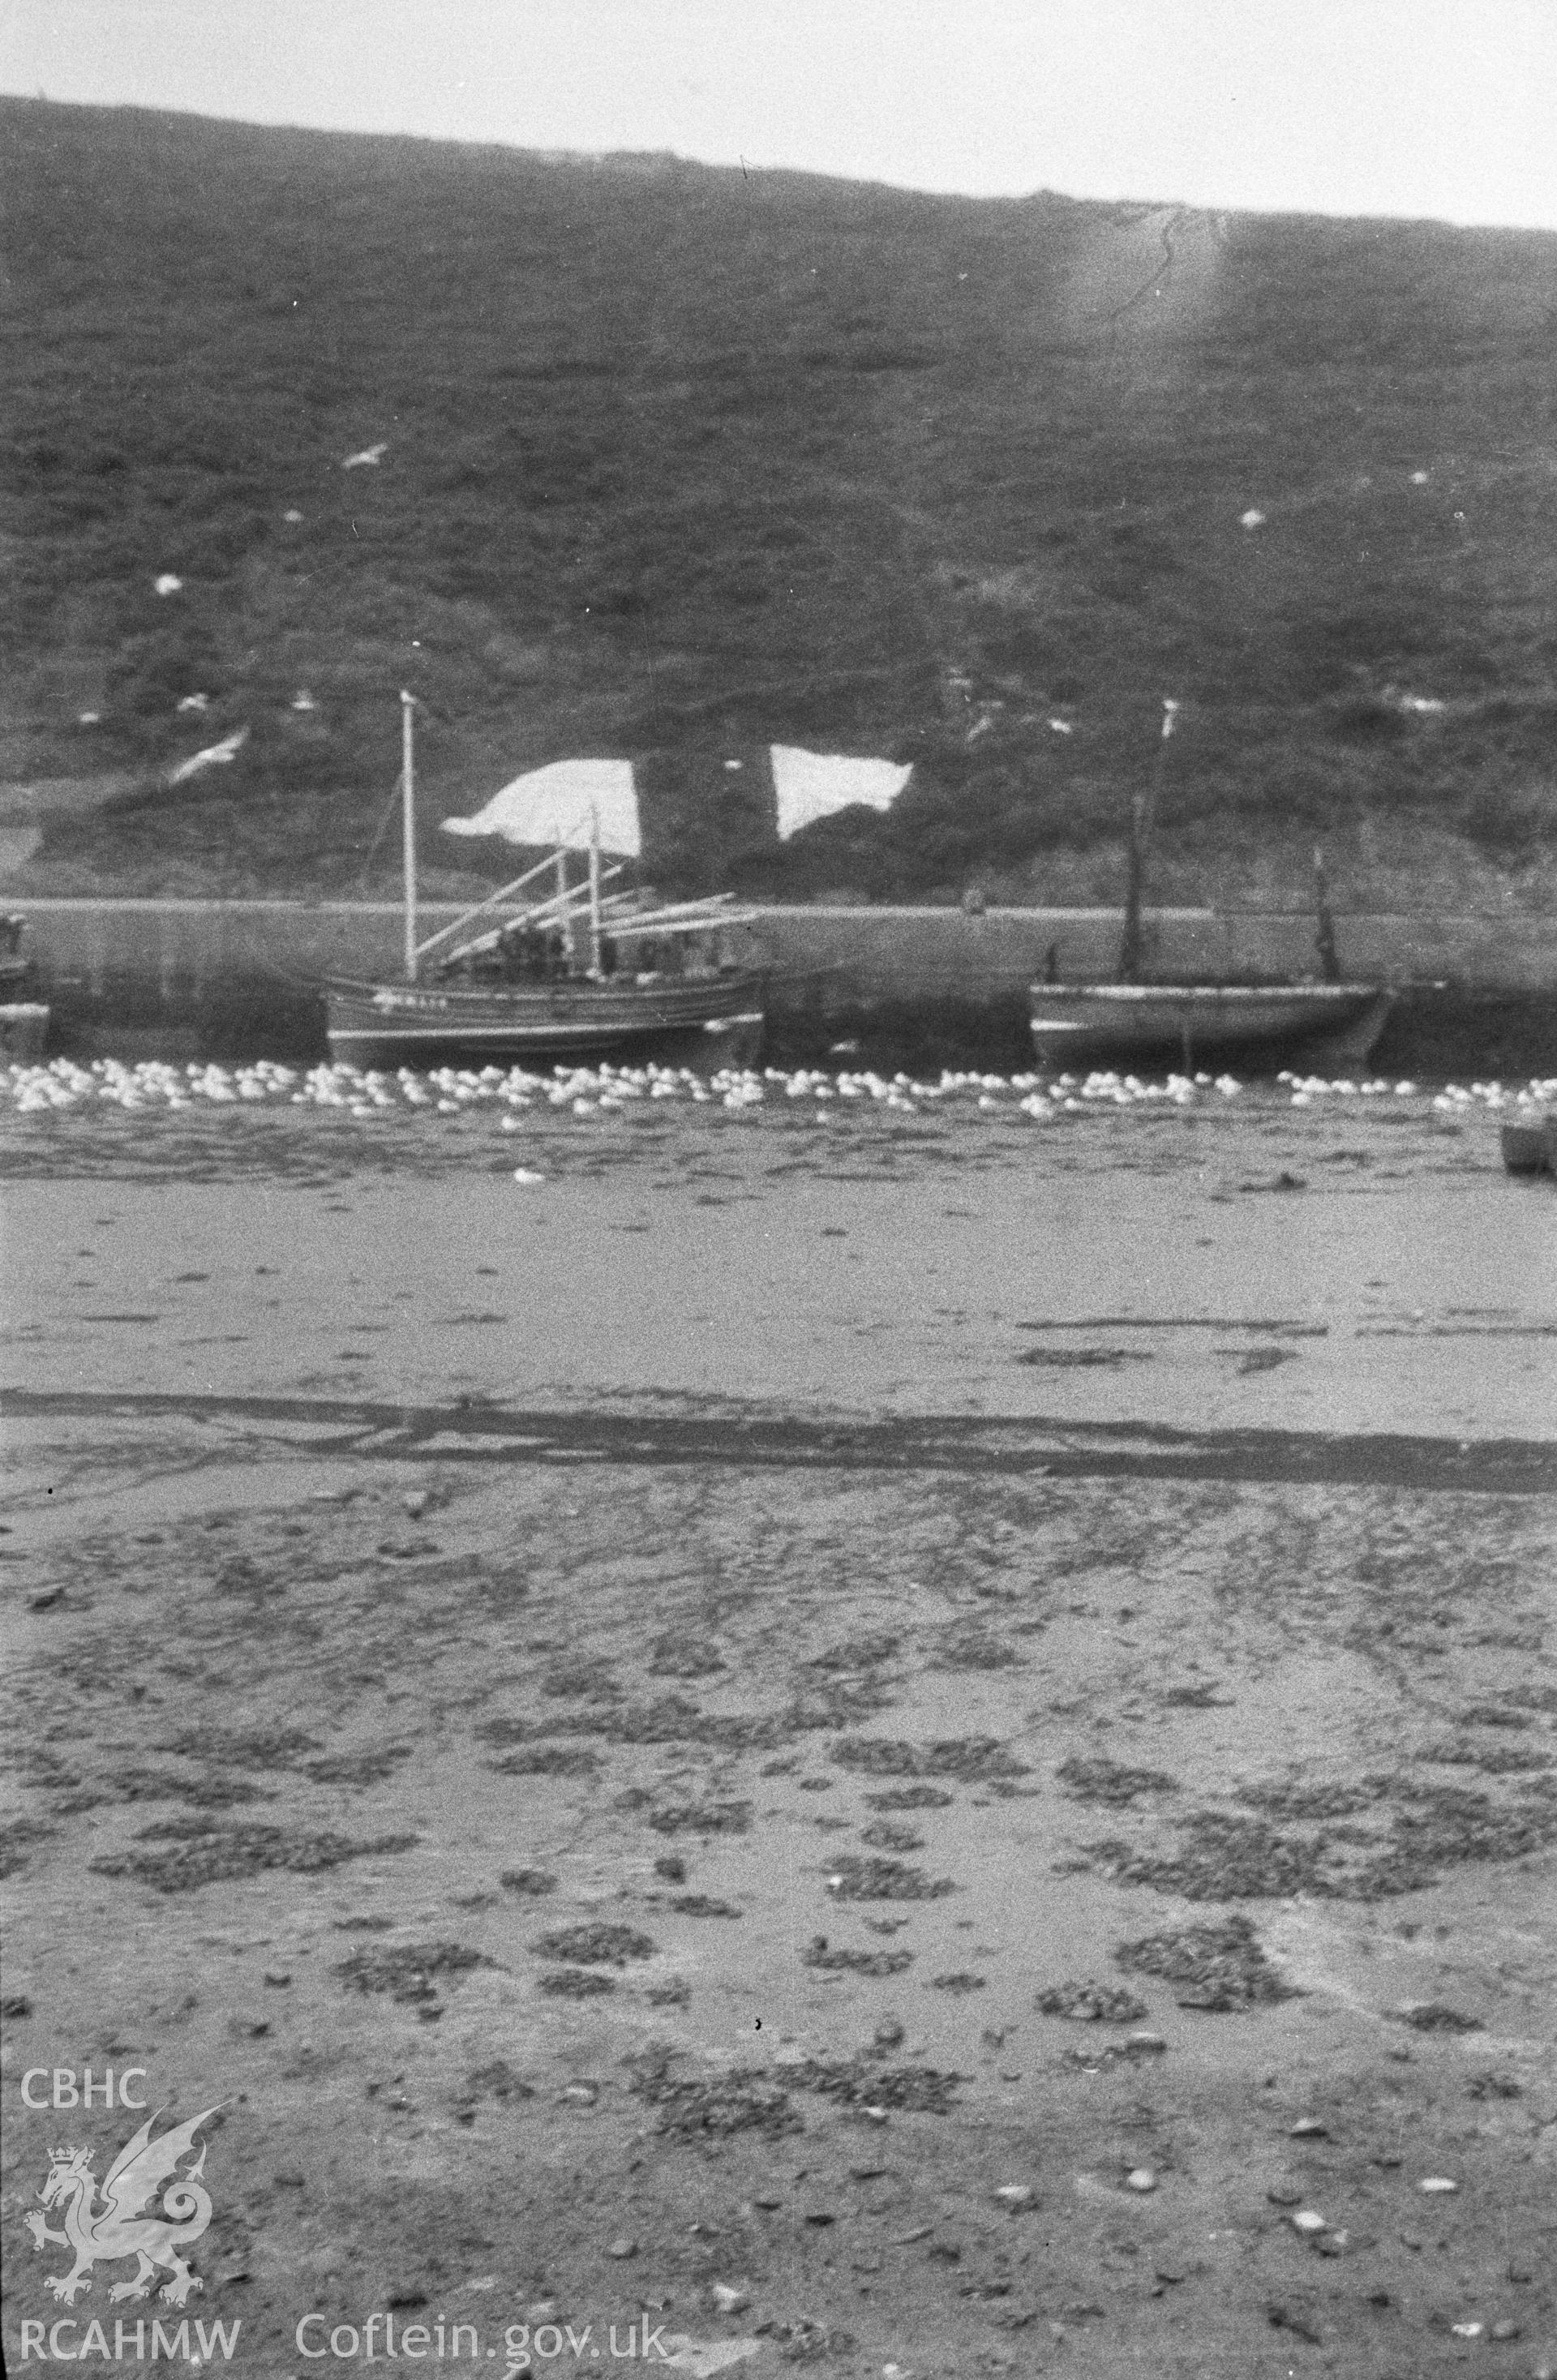 Digital copy of a nitrate negative showing an unidentifed vessel off the coast of Aberystwyth, from the Peter Henley Collection.